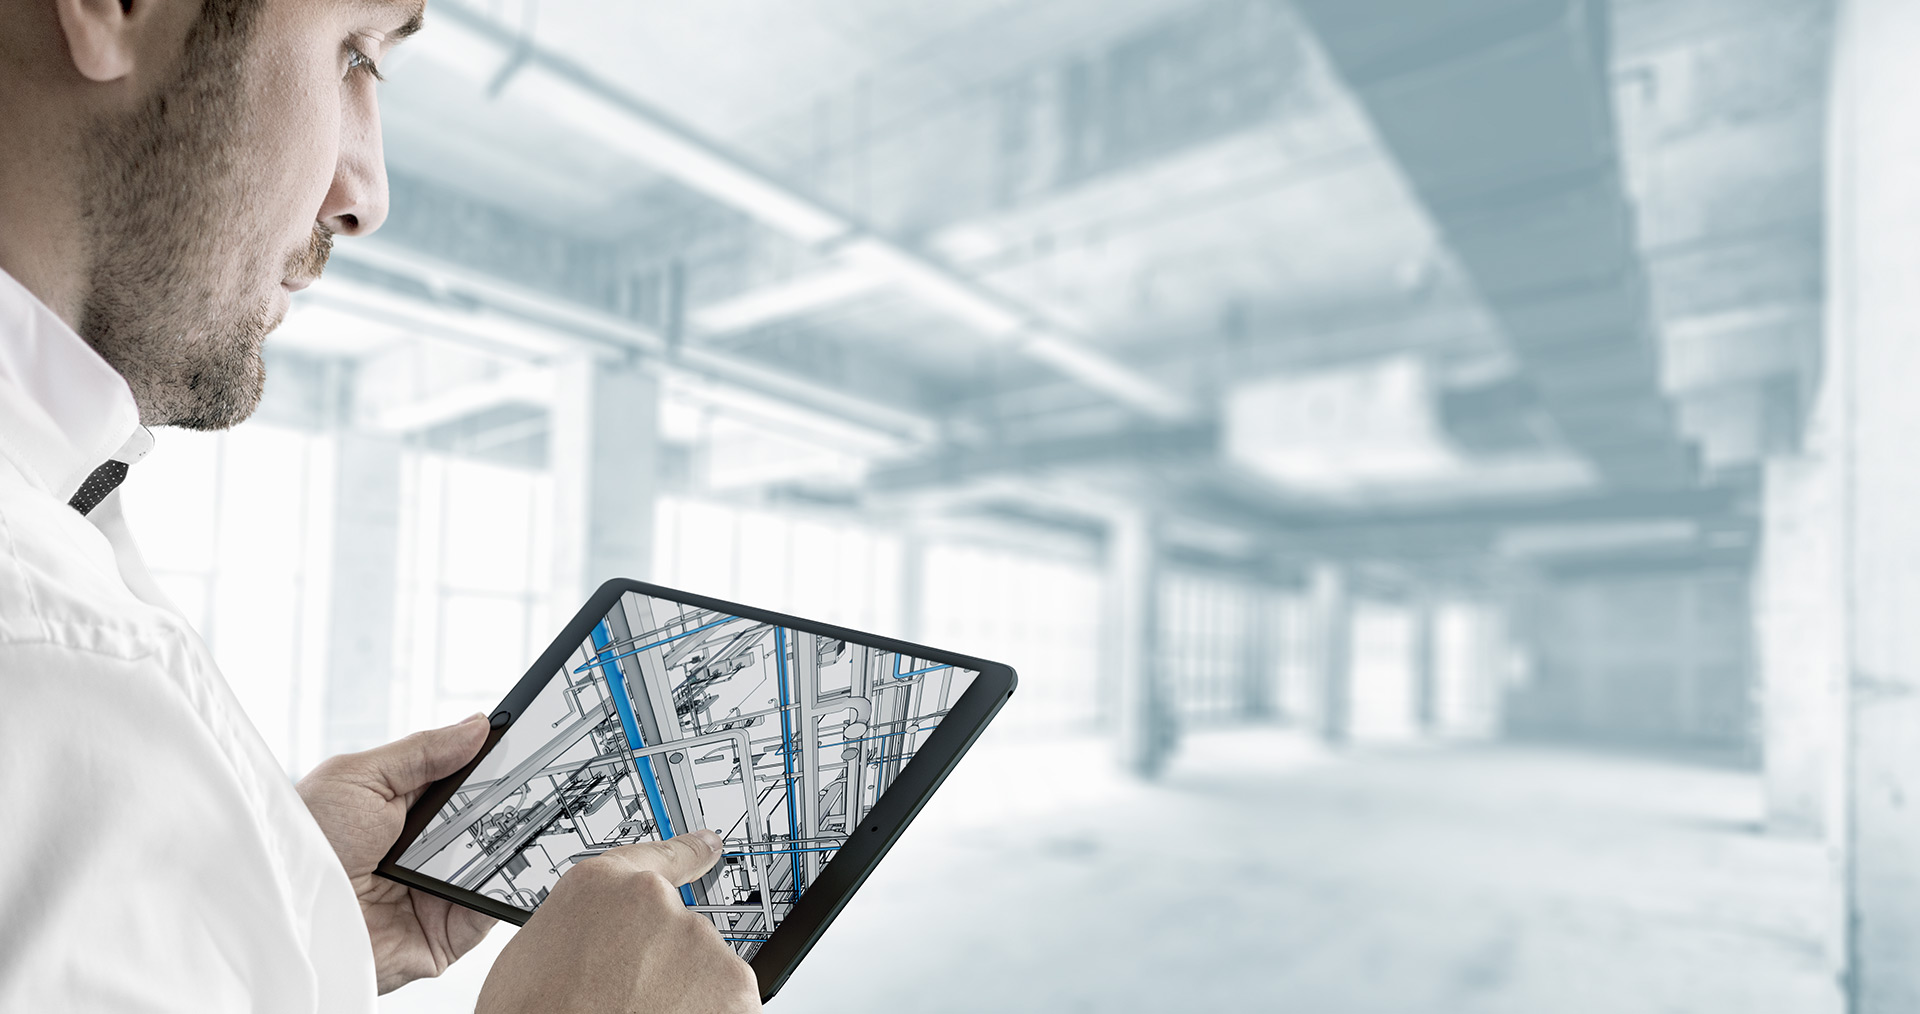 Building Information Modelling (BIM) offers a way of digitally planning building projects.